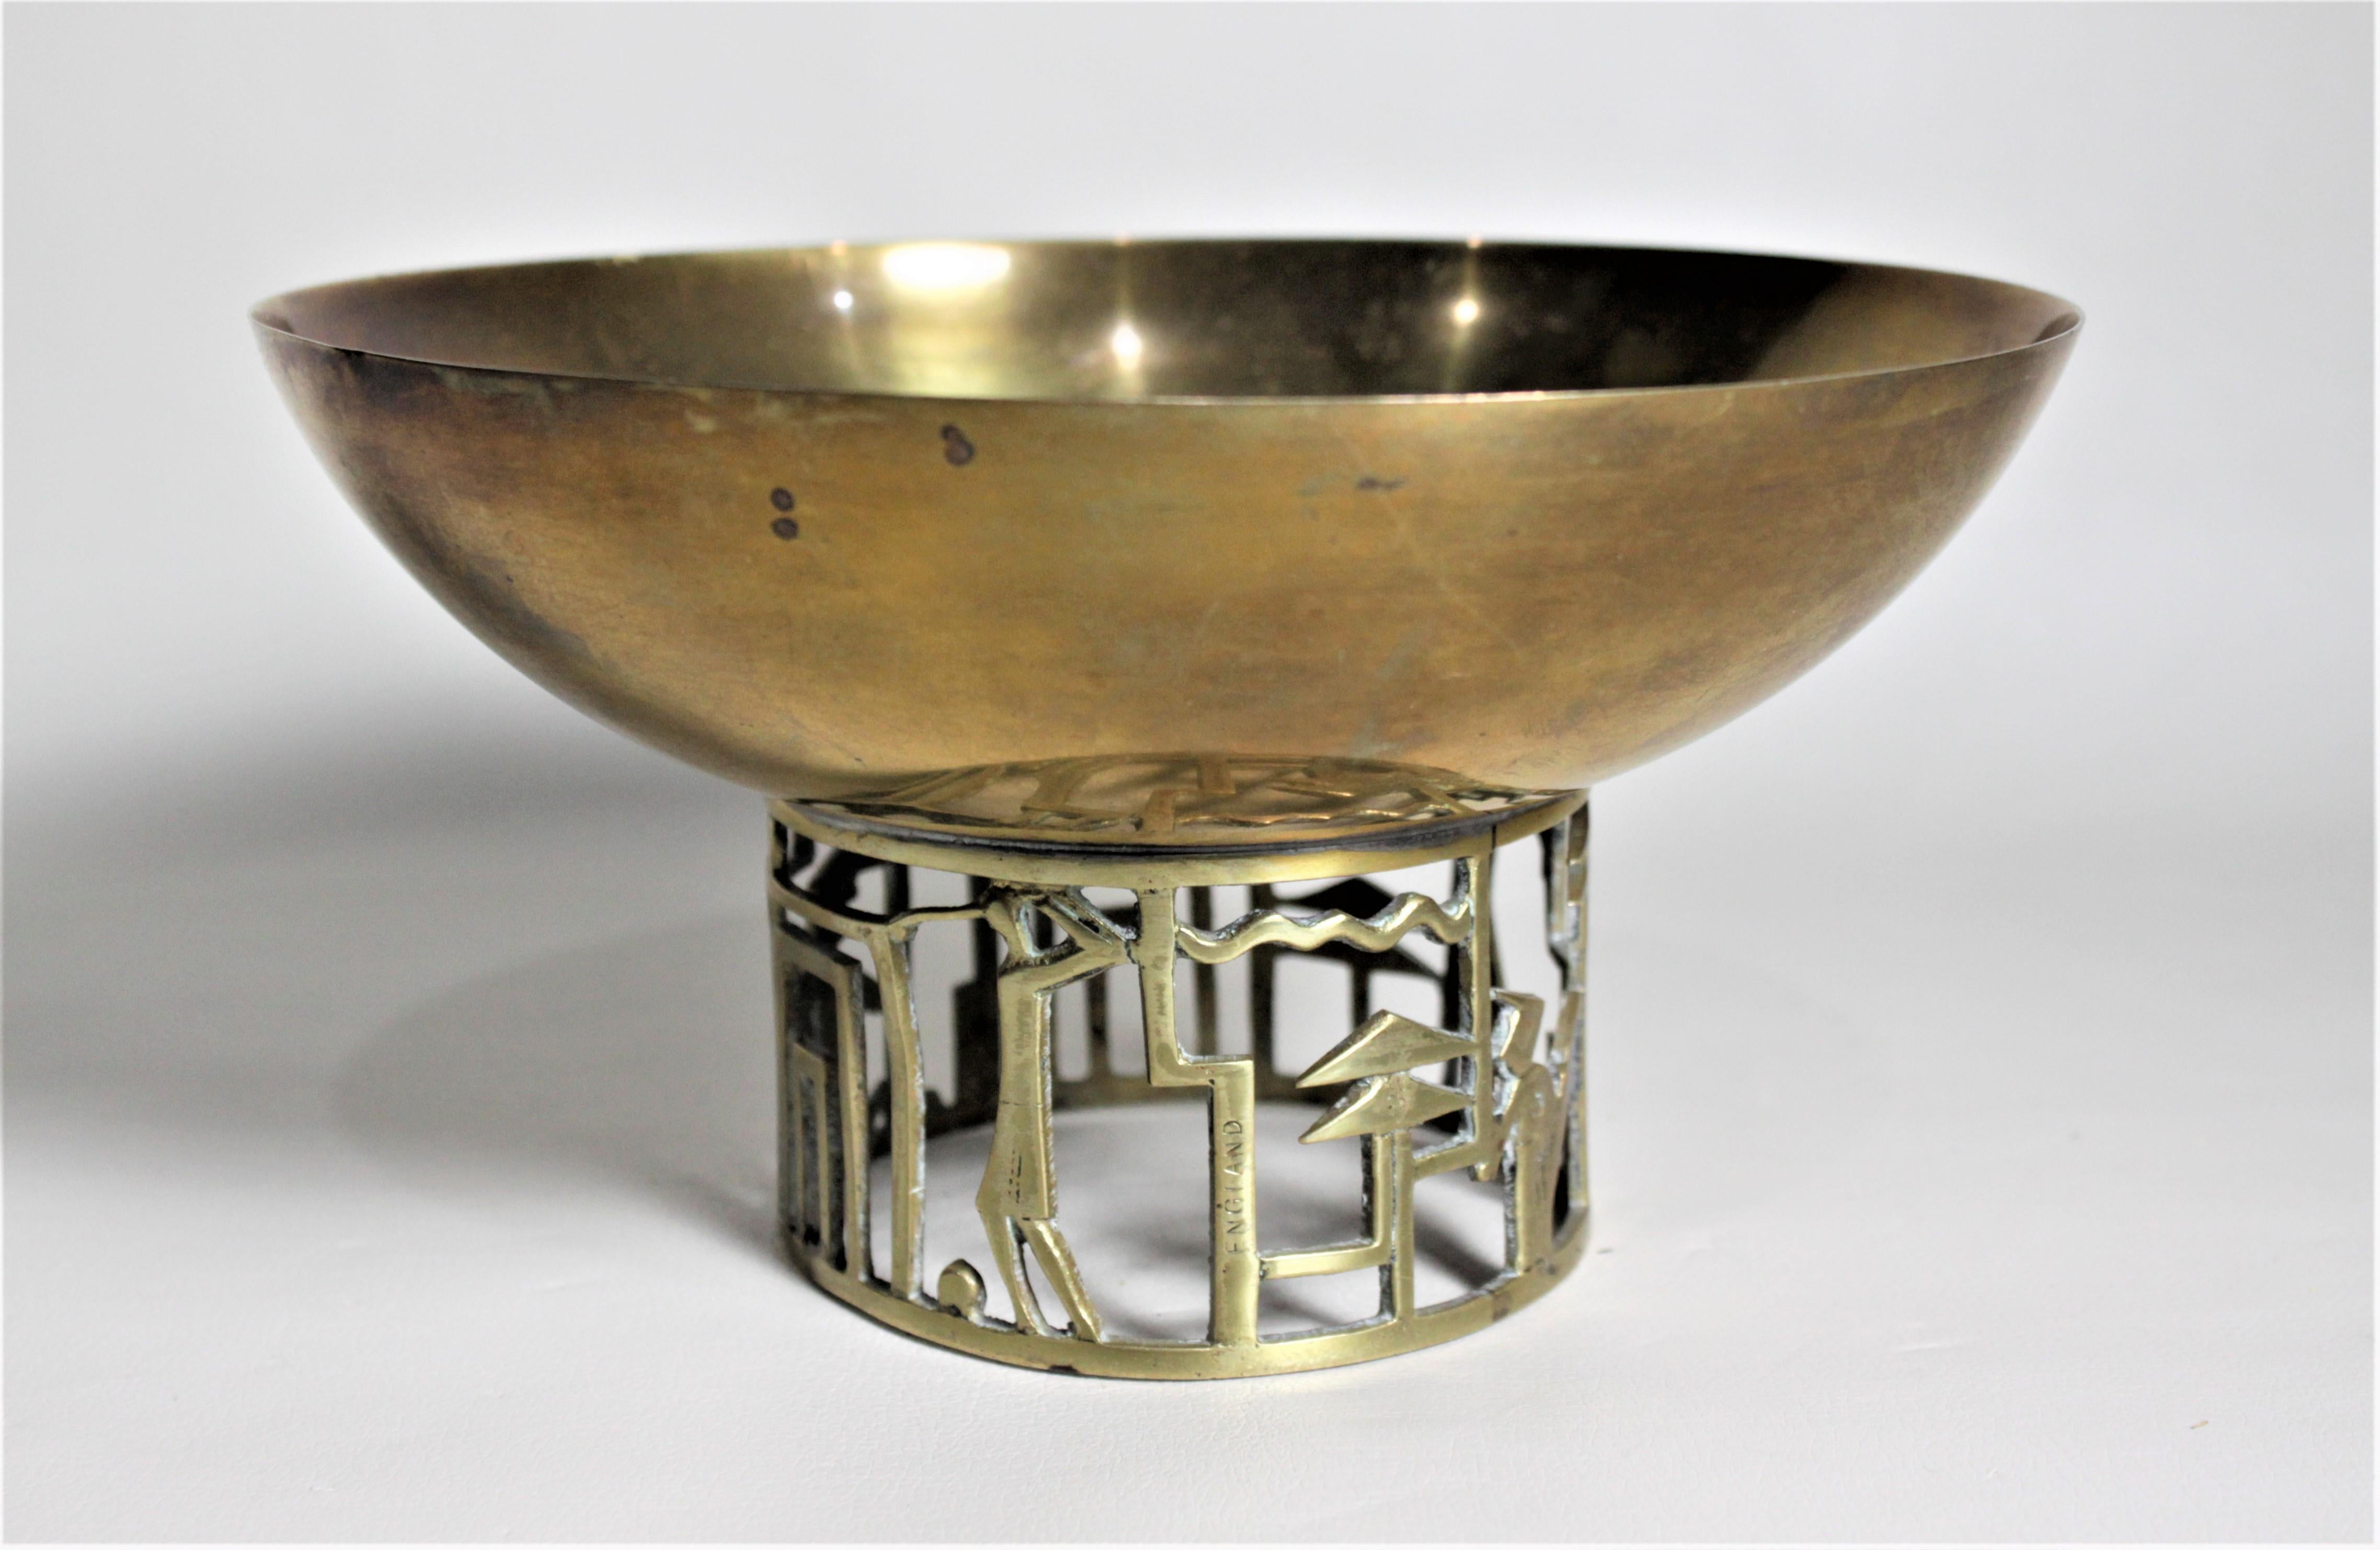 This handcrafted brass pedestal bowl was made during the Art Deco period in a cubist style depicting stylized golf scenes in the base. This bowl is commonly attributed to Karl Hagenauer and the Werkstatte factory of Vienna, but curiously this bowl